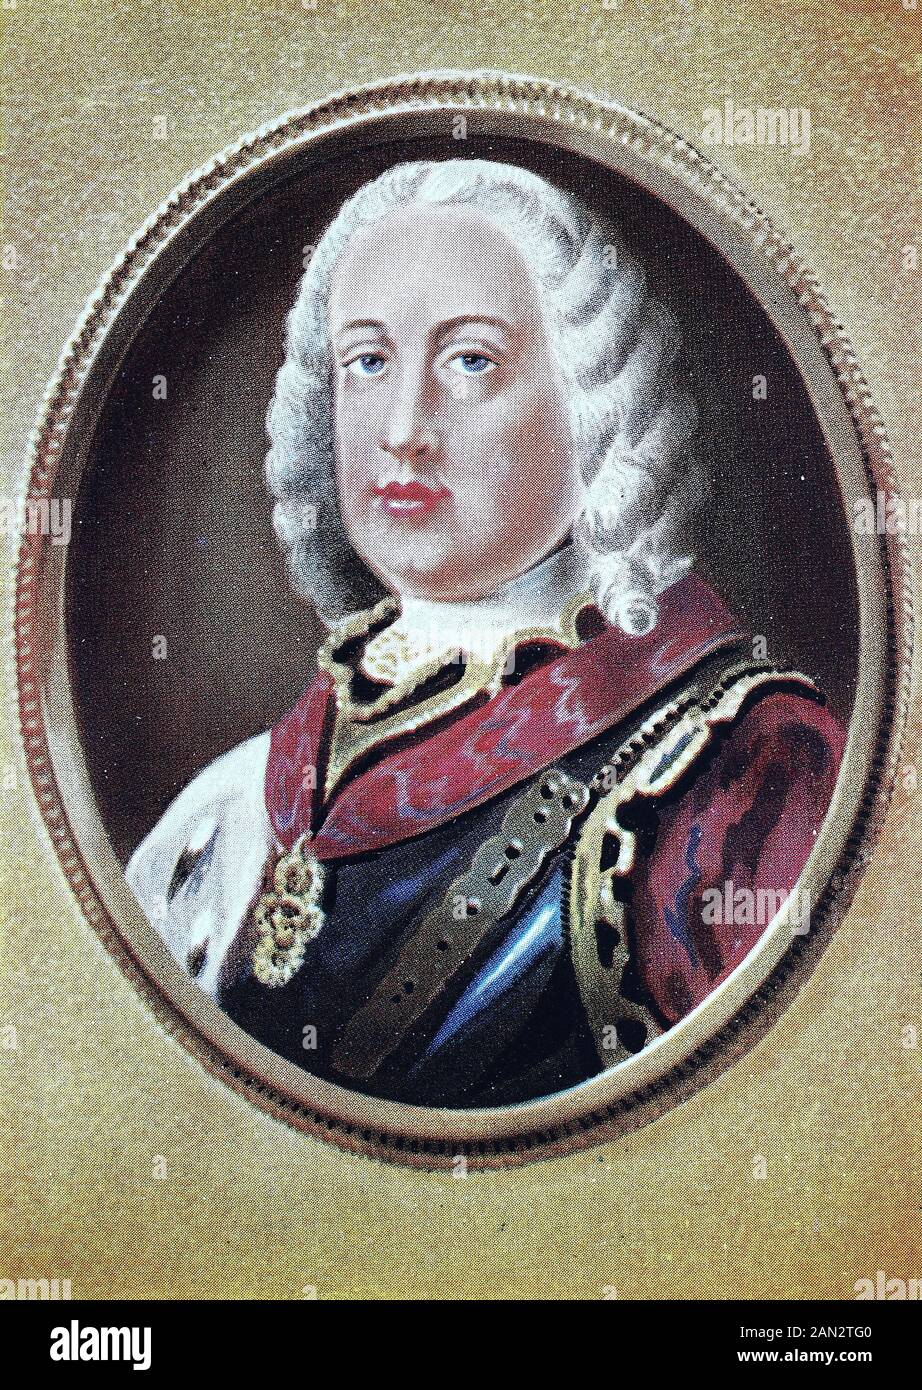 Francis I, Franz Stefan, François Étienne, 8 December 1708 – 18 August 1765, was Holy Roman Emperor and Grand Duke of Tuscany, though his wife effectively executed the real powers of those positions.,   /  Franz I., Franz Stefan, François Étienne, 8. Dezember 1708 - 18. August 1765, war Kaiser und Großherzog der Toskana, obwohl seine Frau die wirklichen Befugnisse dieser Positionen effektiv wahrnahm, Historisch, digital improved reproduction of an original from the 19th century / digitale Reproduktion einer Originalvorlage aus dem 19. Jahrhundert Stock Photo